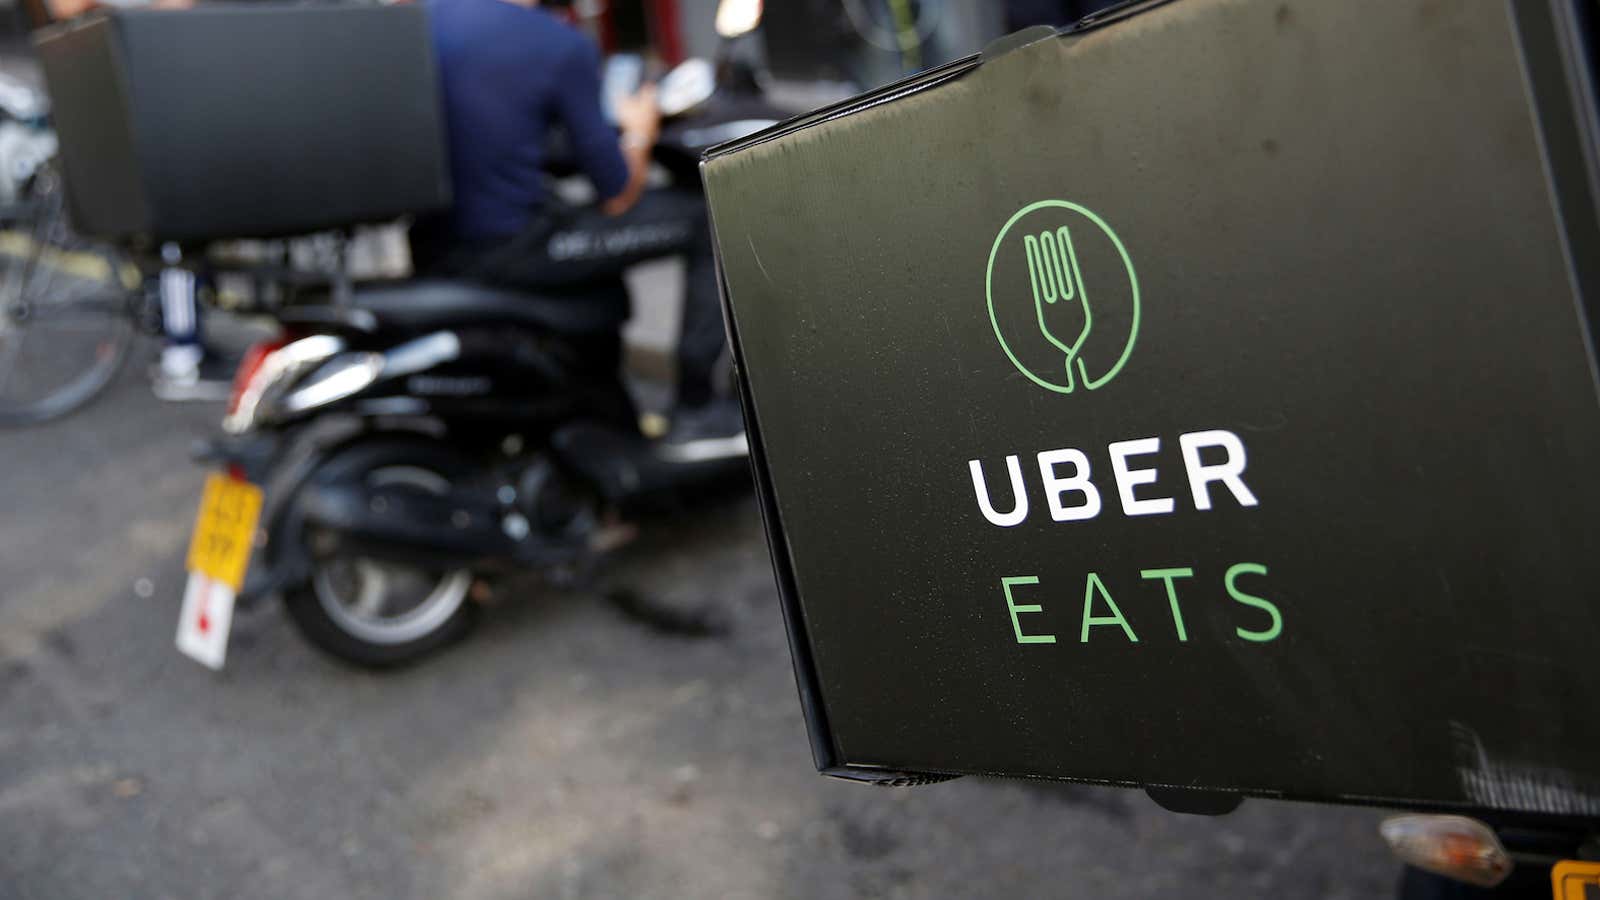 UberEats has come a long way in a few short years.